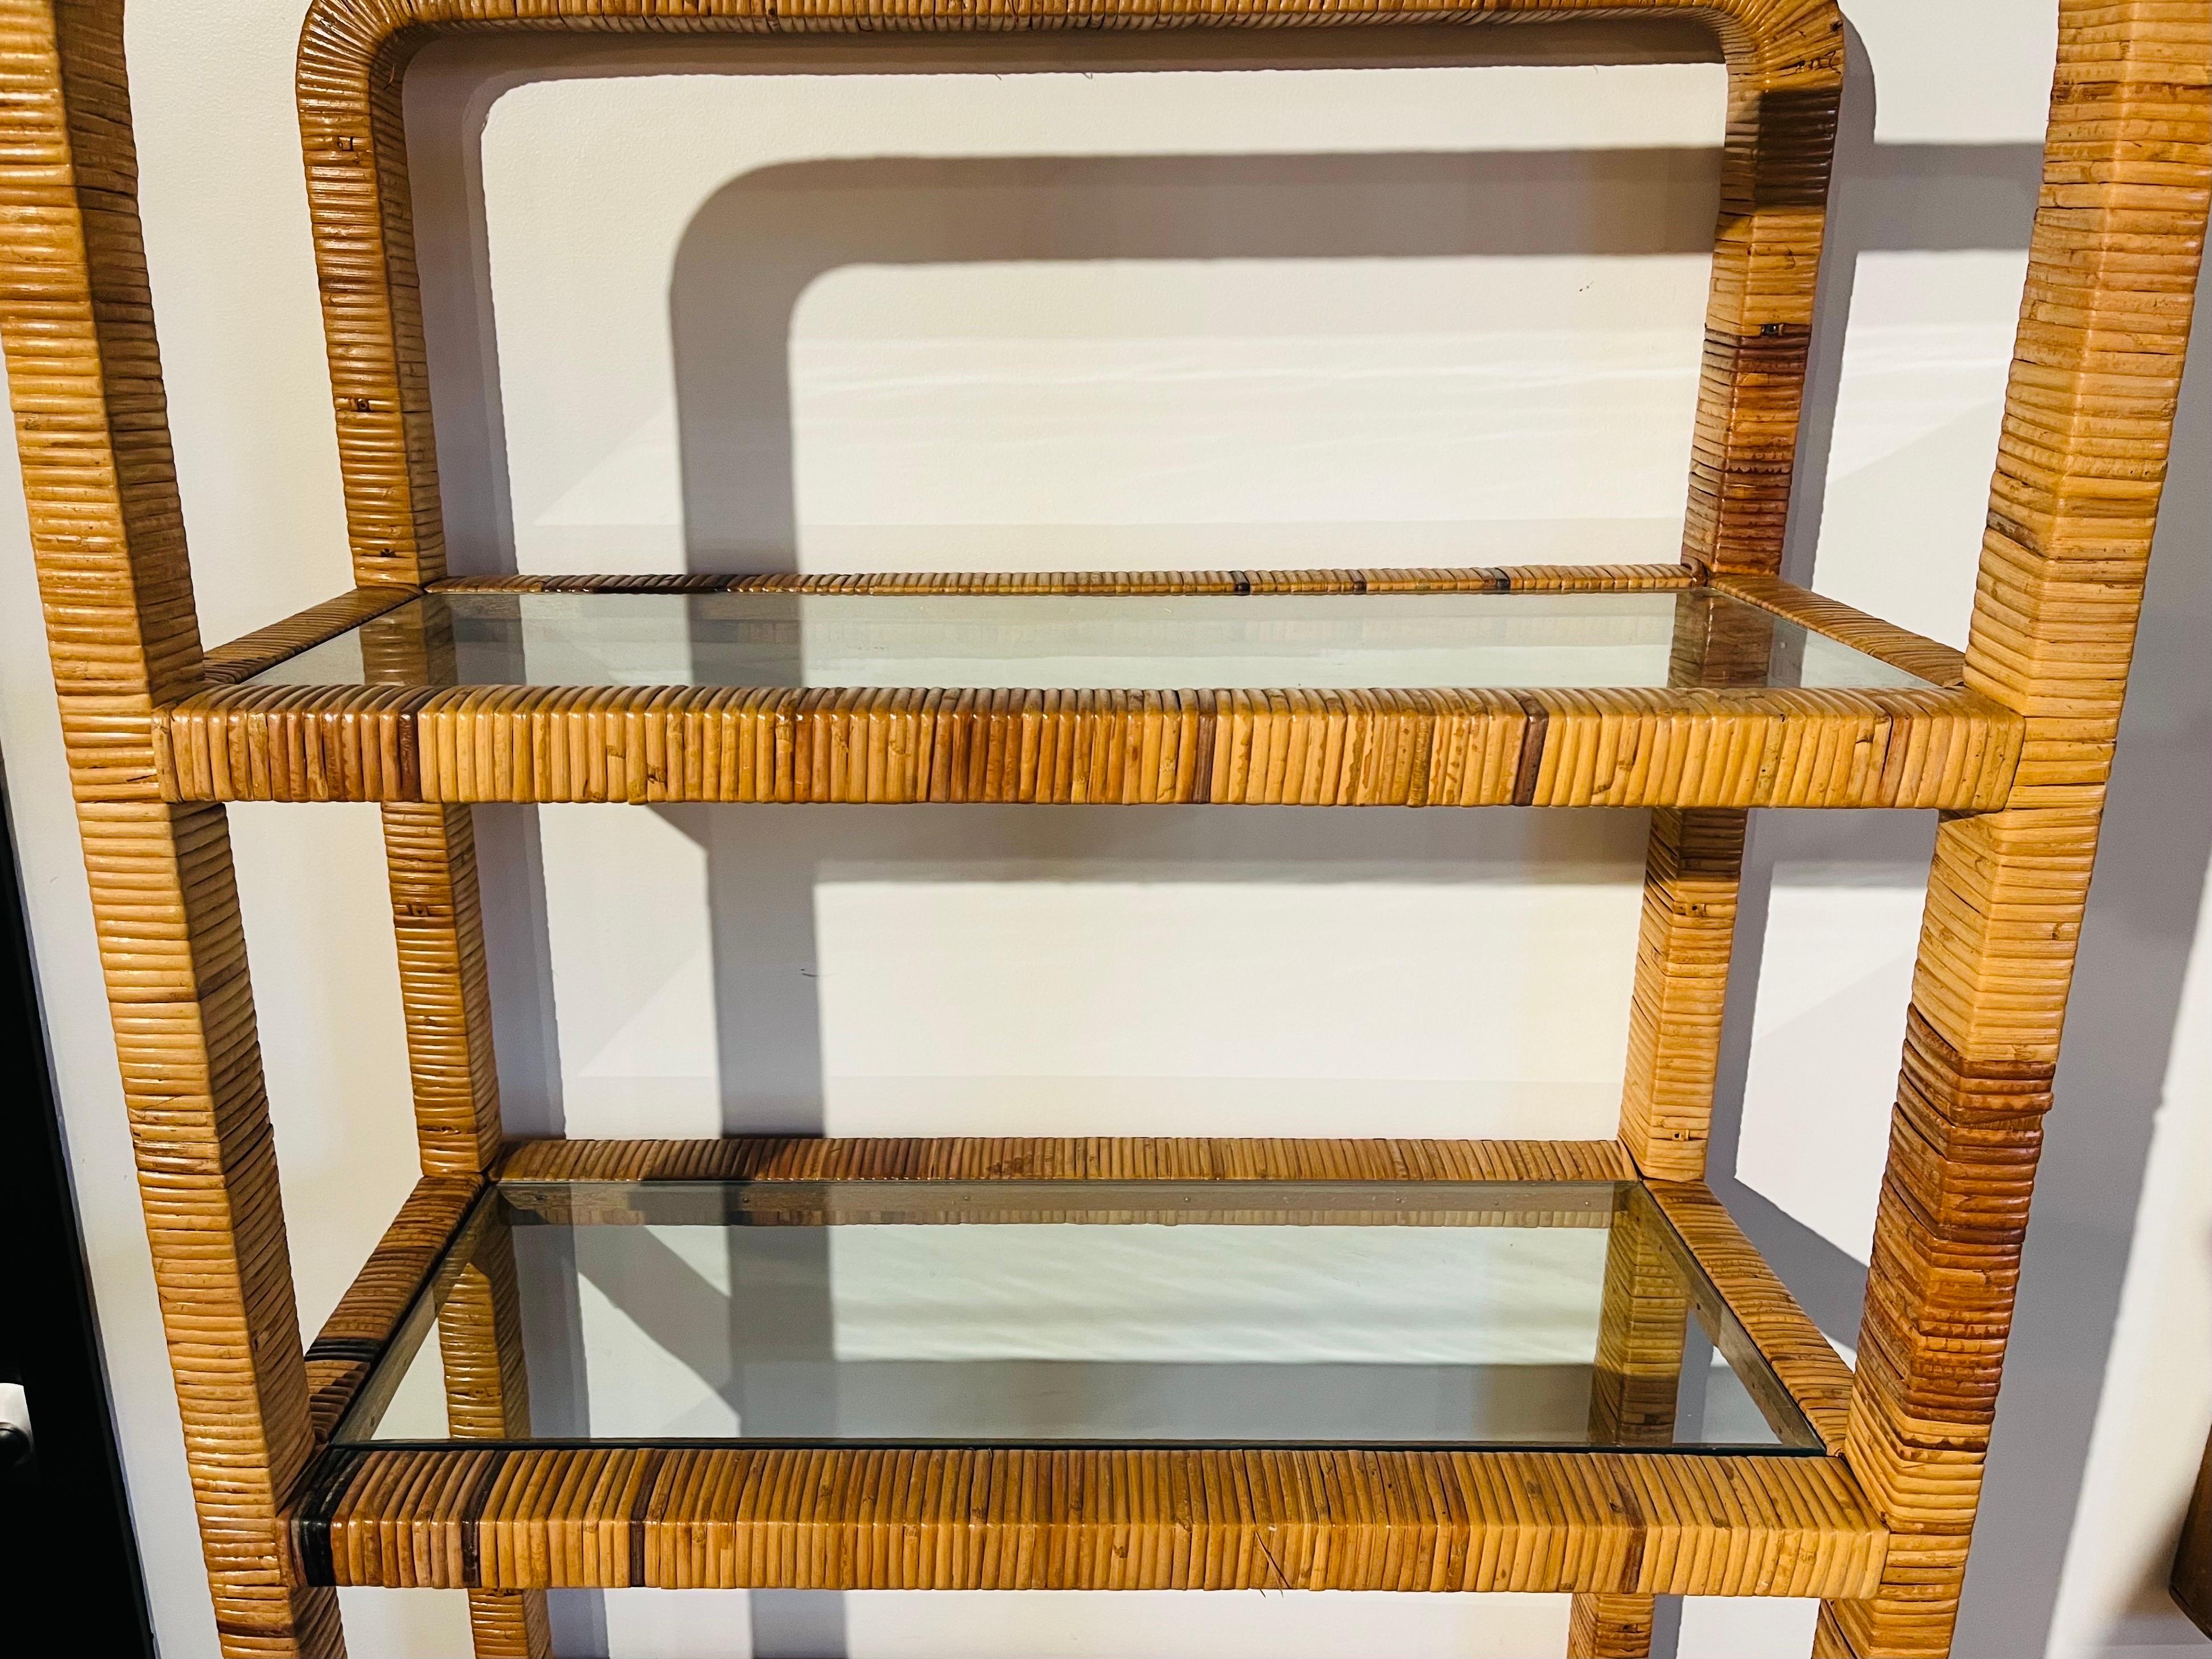 vintage rattan etagere with glass shelves